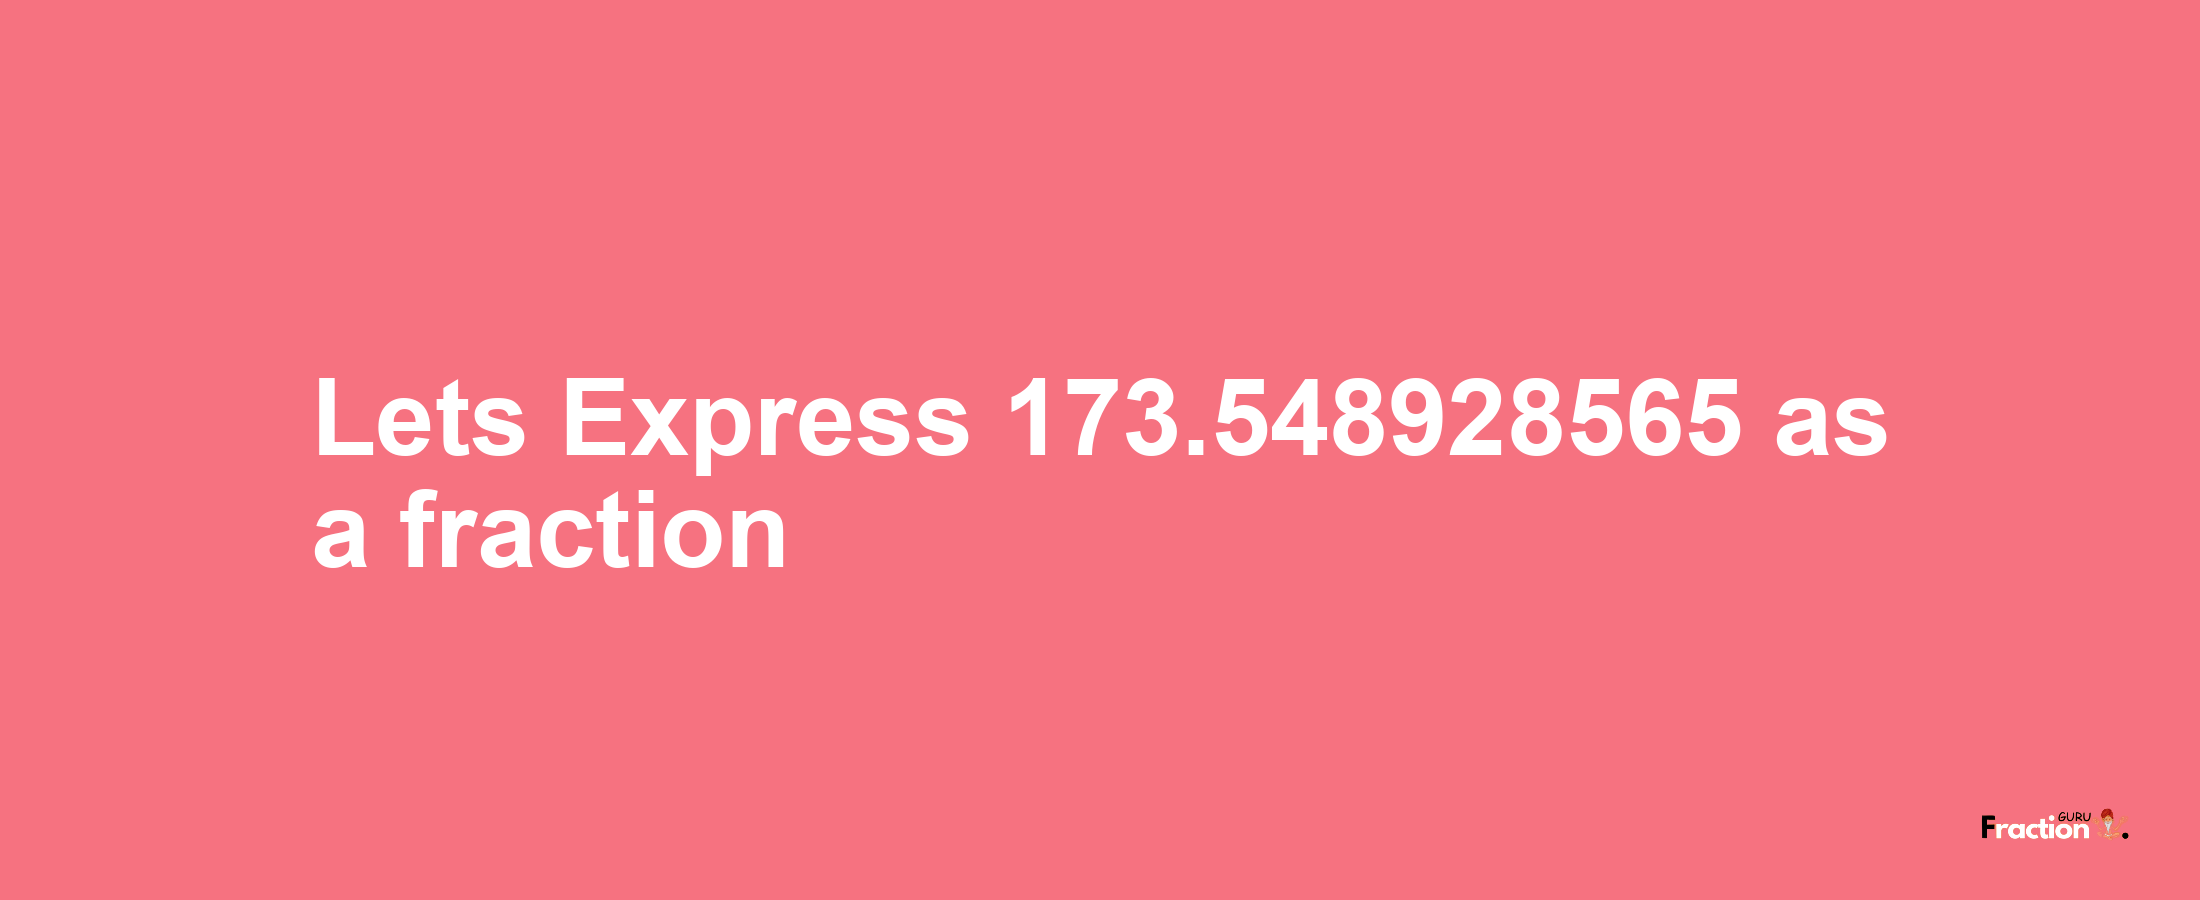 Lets Express 173.548928565 as afraction